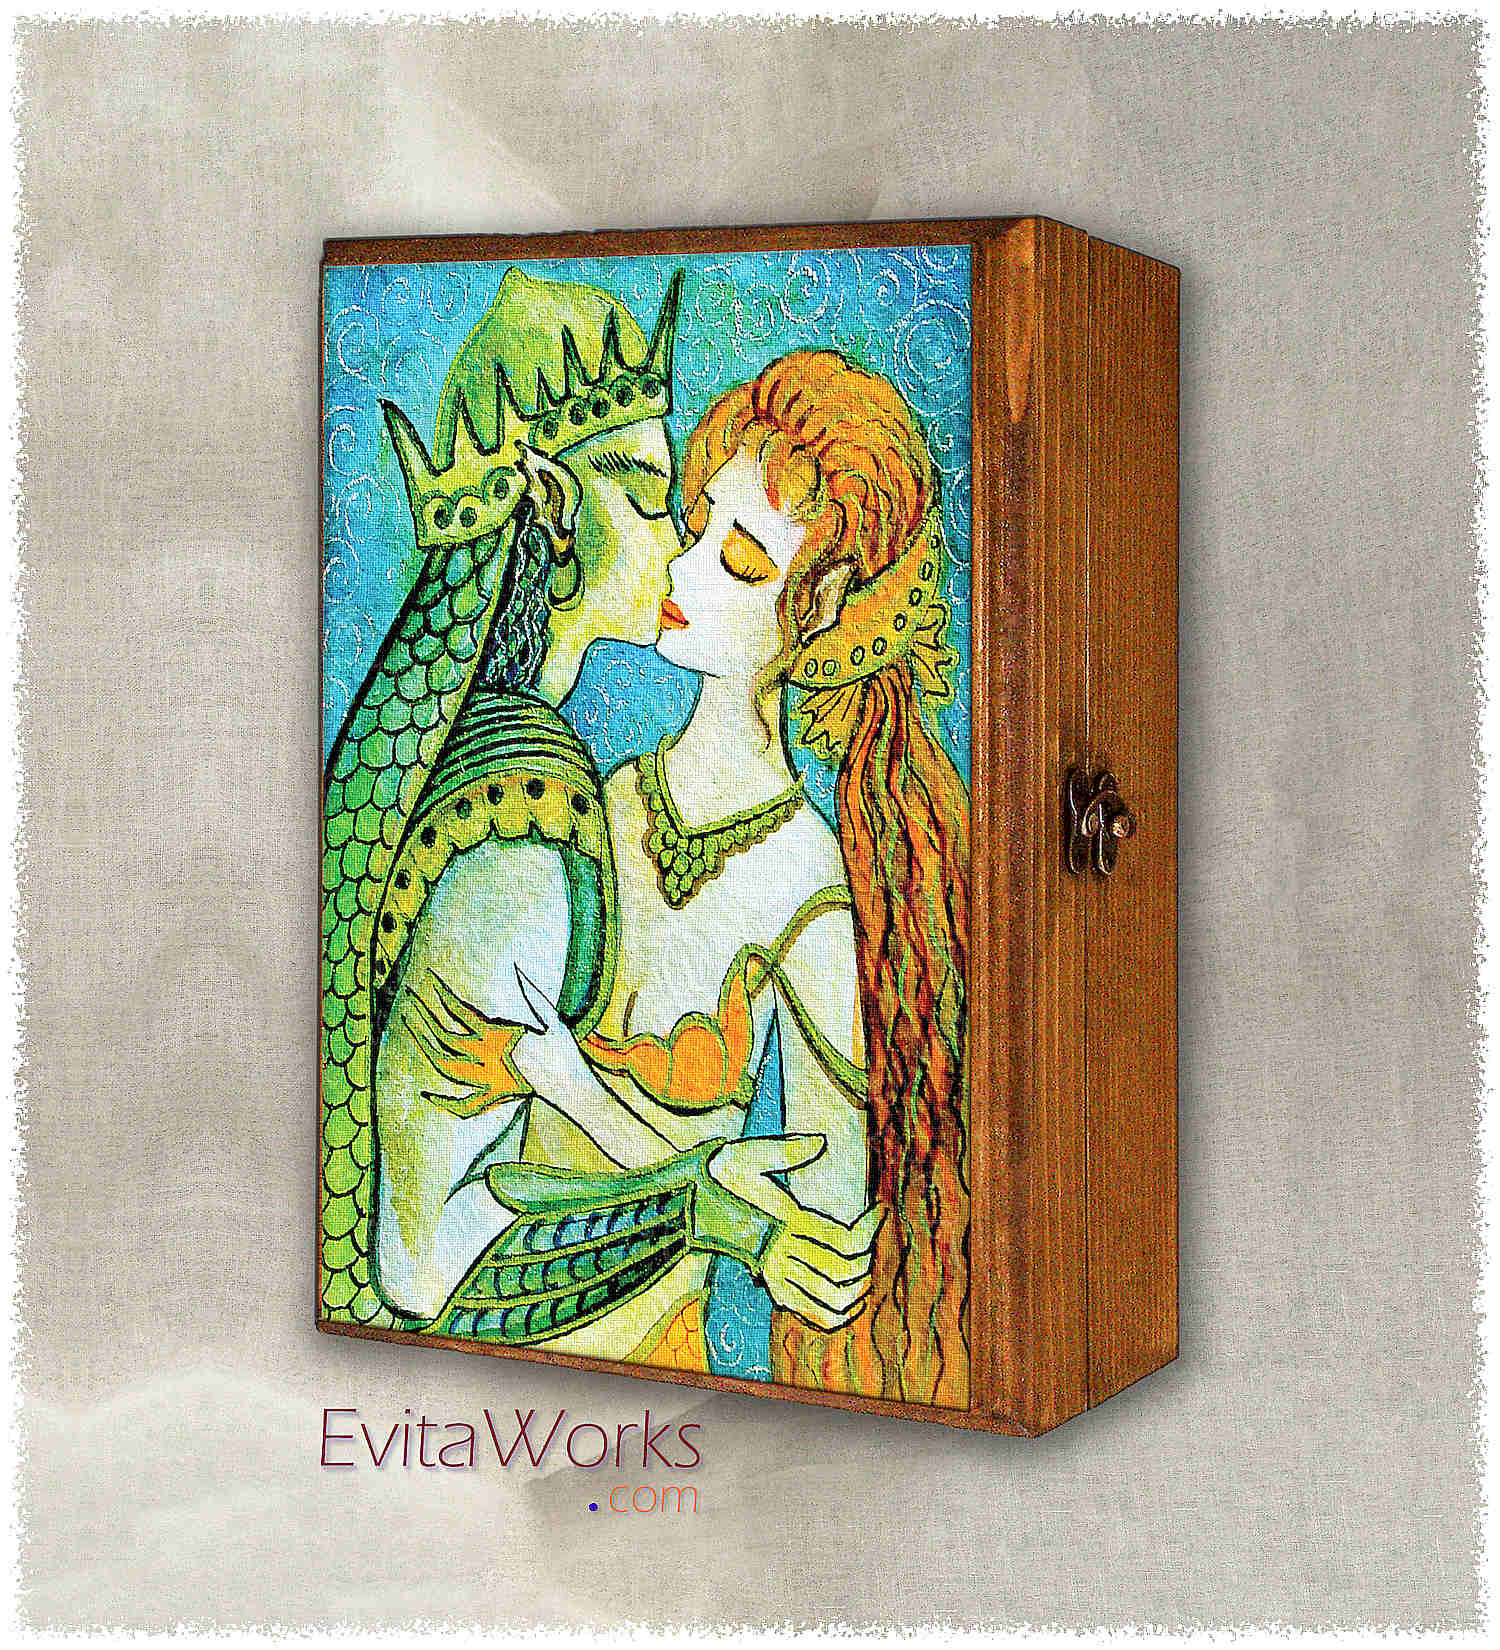 Hit to learn about "Mermaid 49, beautiful female creature, couple art" on jewelboxes